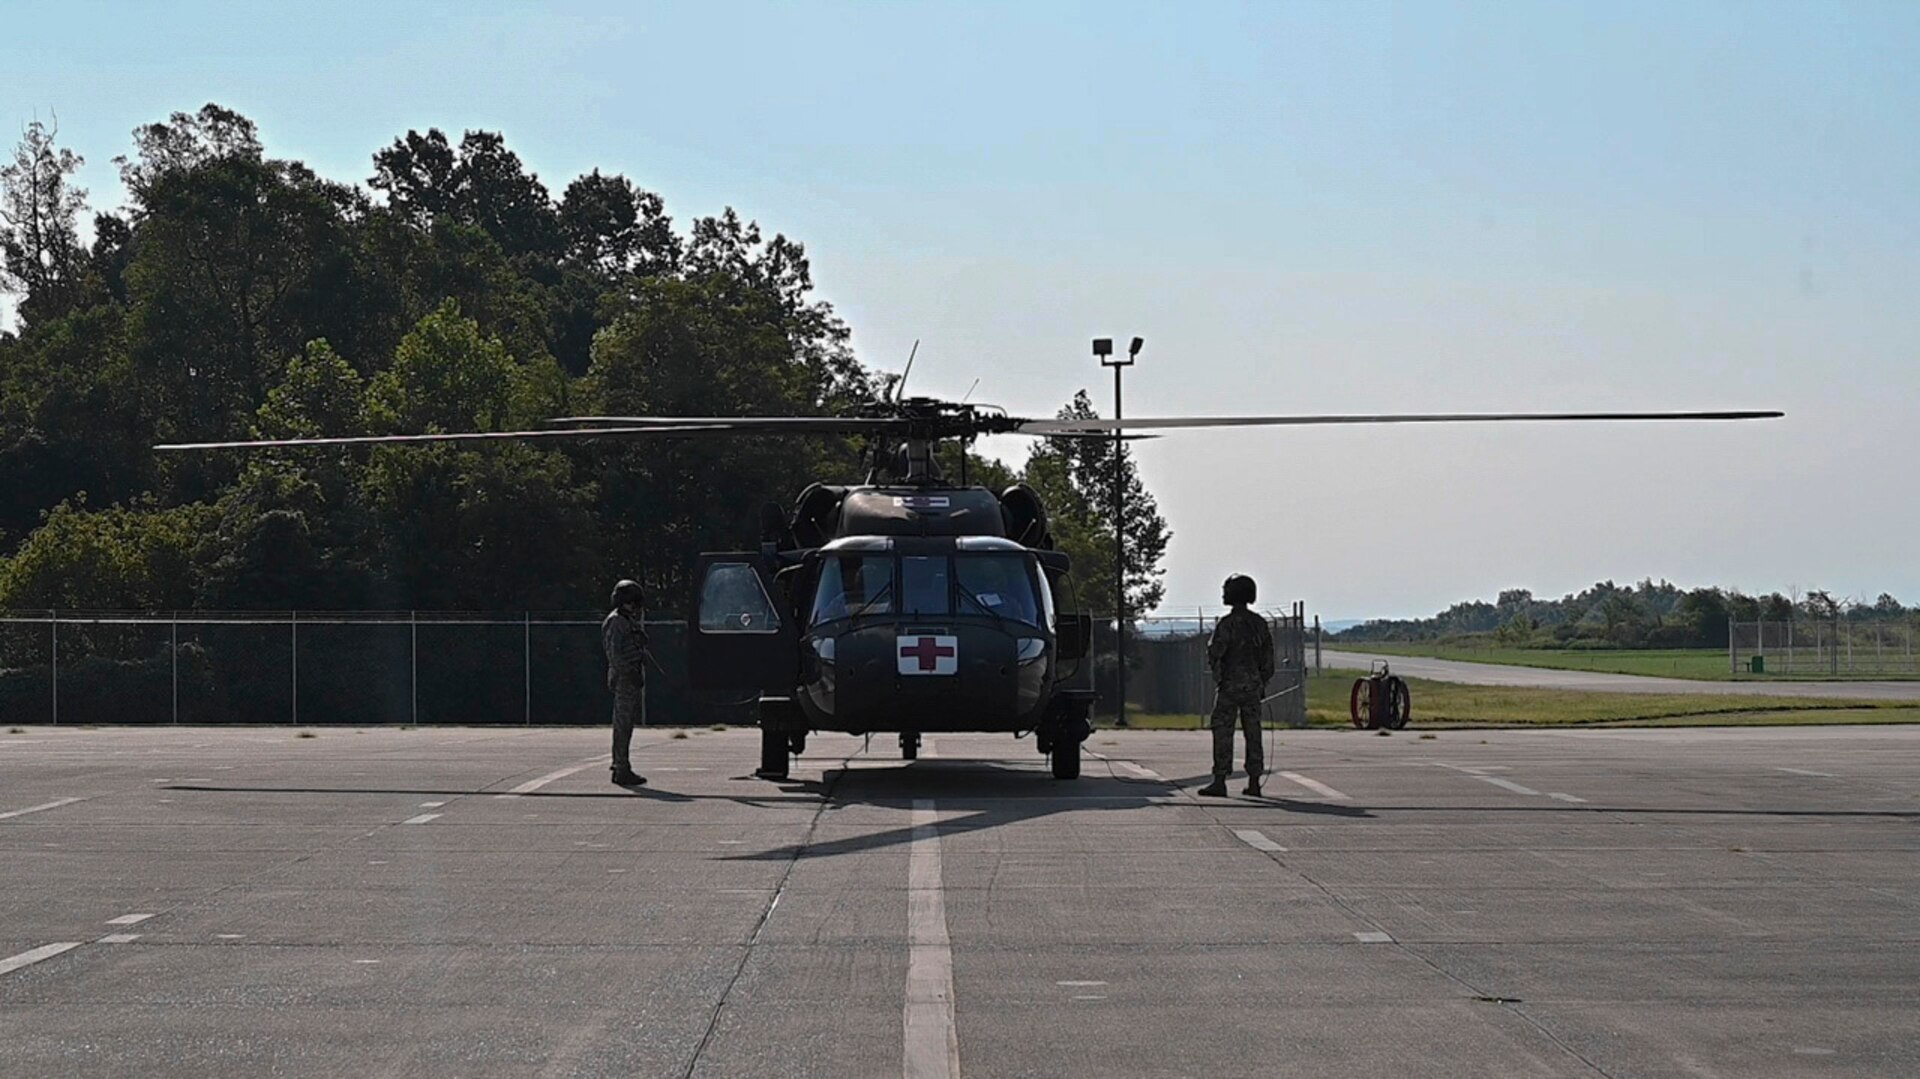 Crew members from the West Virginia National Guard's Company C., 2-104th General Support Aviation Battalion, located in Williamstown, W.Va., prepare to deploy to South Carolina in support of Hurricane Dorian response and recovery operations Sept. 4, 2019. Eight Soldiers from the aeromedical evacuation crew will be on standby for a week to provide assistance as needed. (U.S. Army National Guard photo by Edwin Wriston)